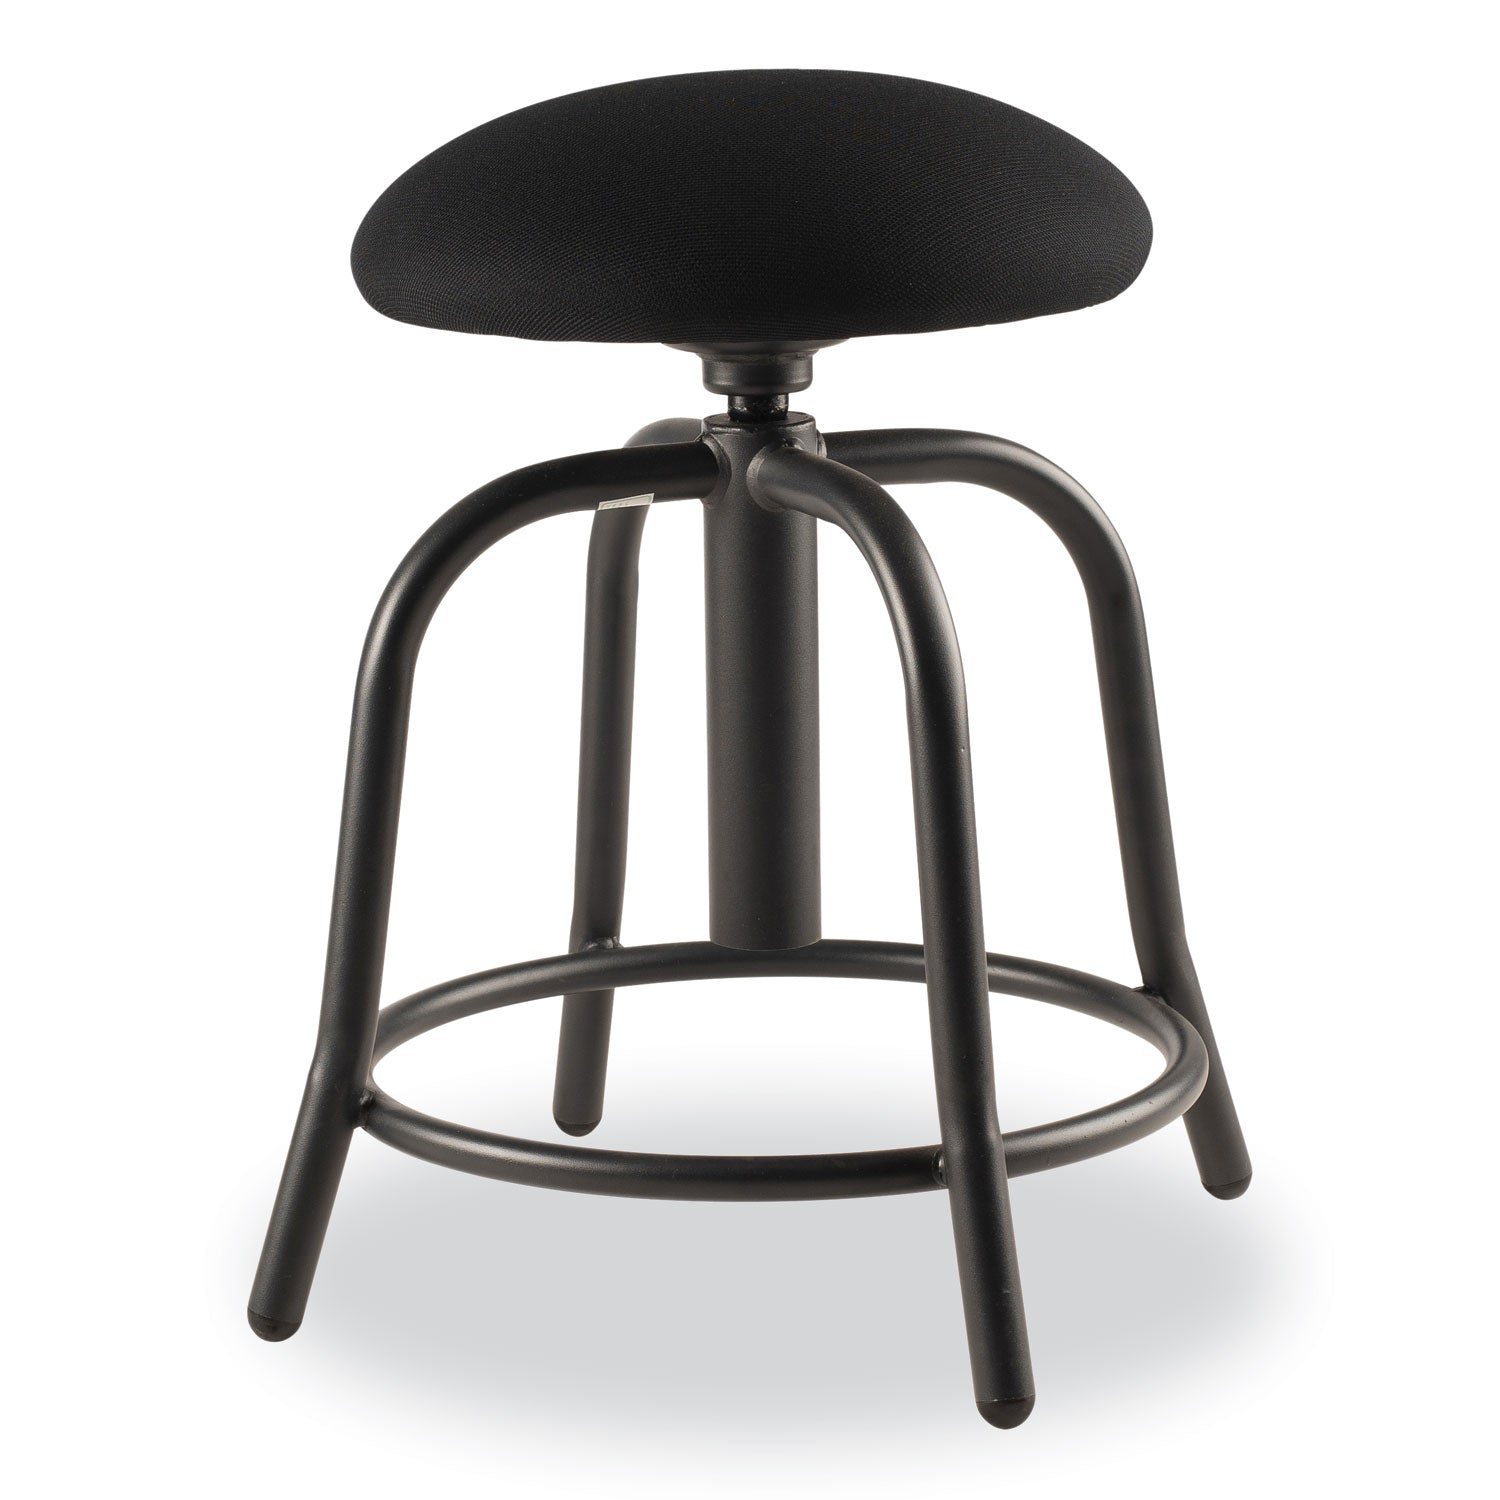 6800-series-height-adj-fabric-seat-swivel-stool-supports-300-lb-18-25-seat-height-black-seat-base-ships-in-1-3-bus-days_nps6810s10 - 1